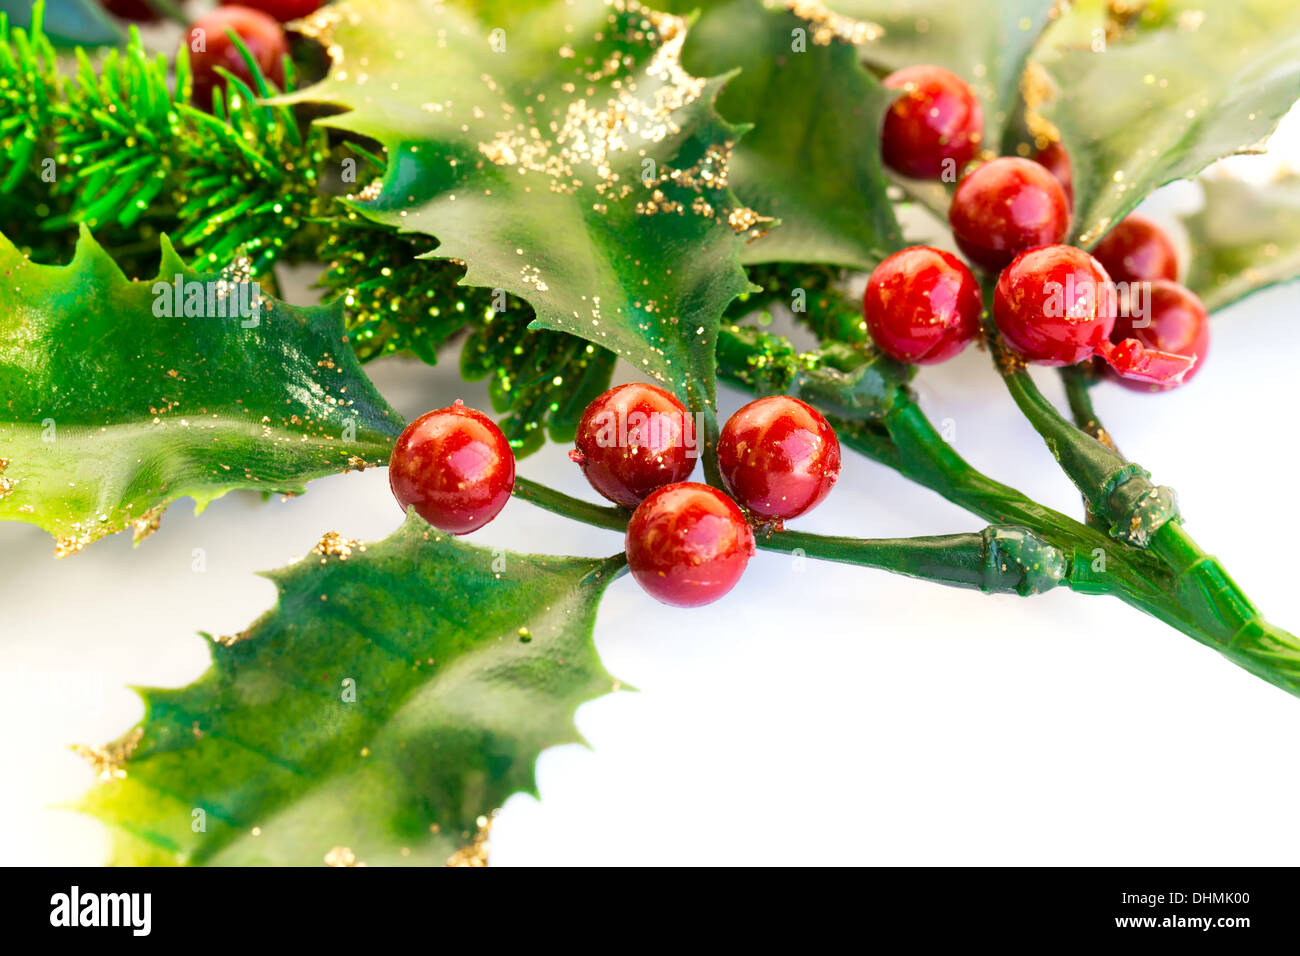 Holly berry plant with red berries on white background, Christmas decoration. Stock Photo